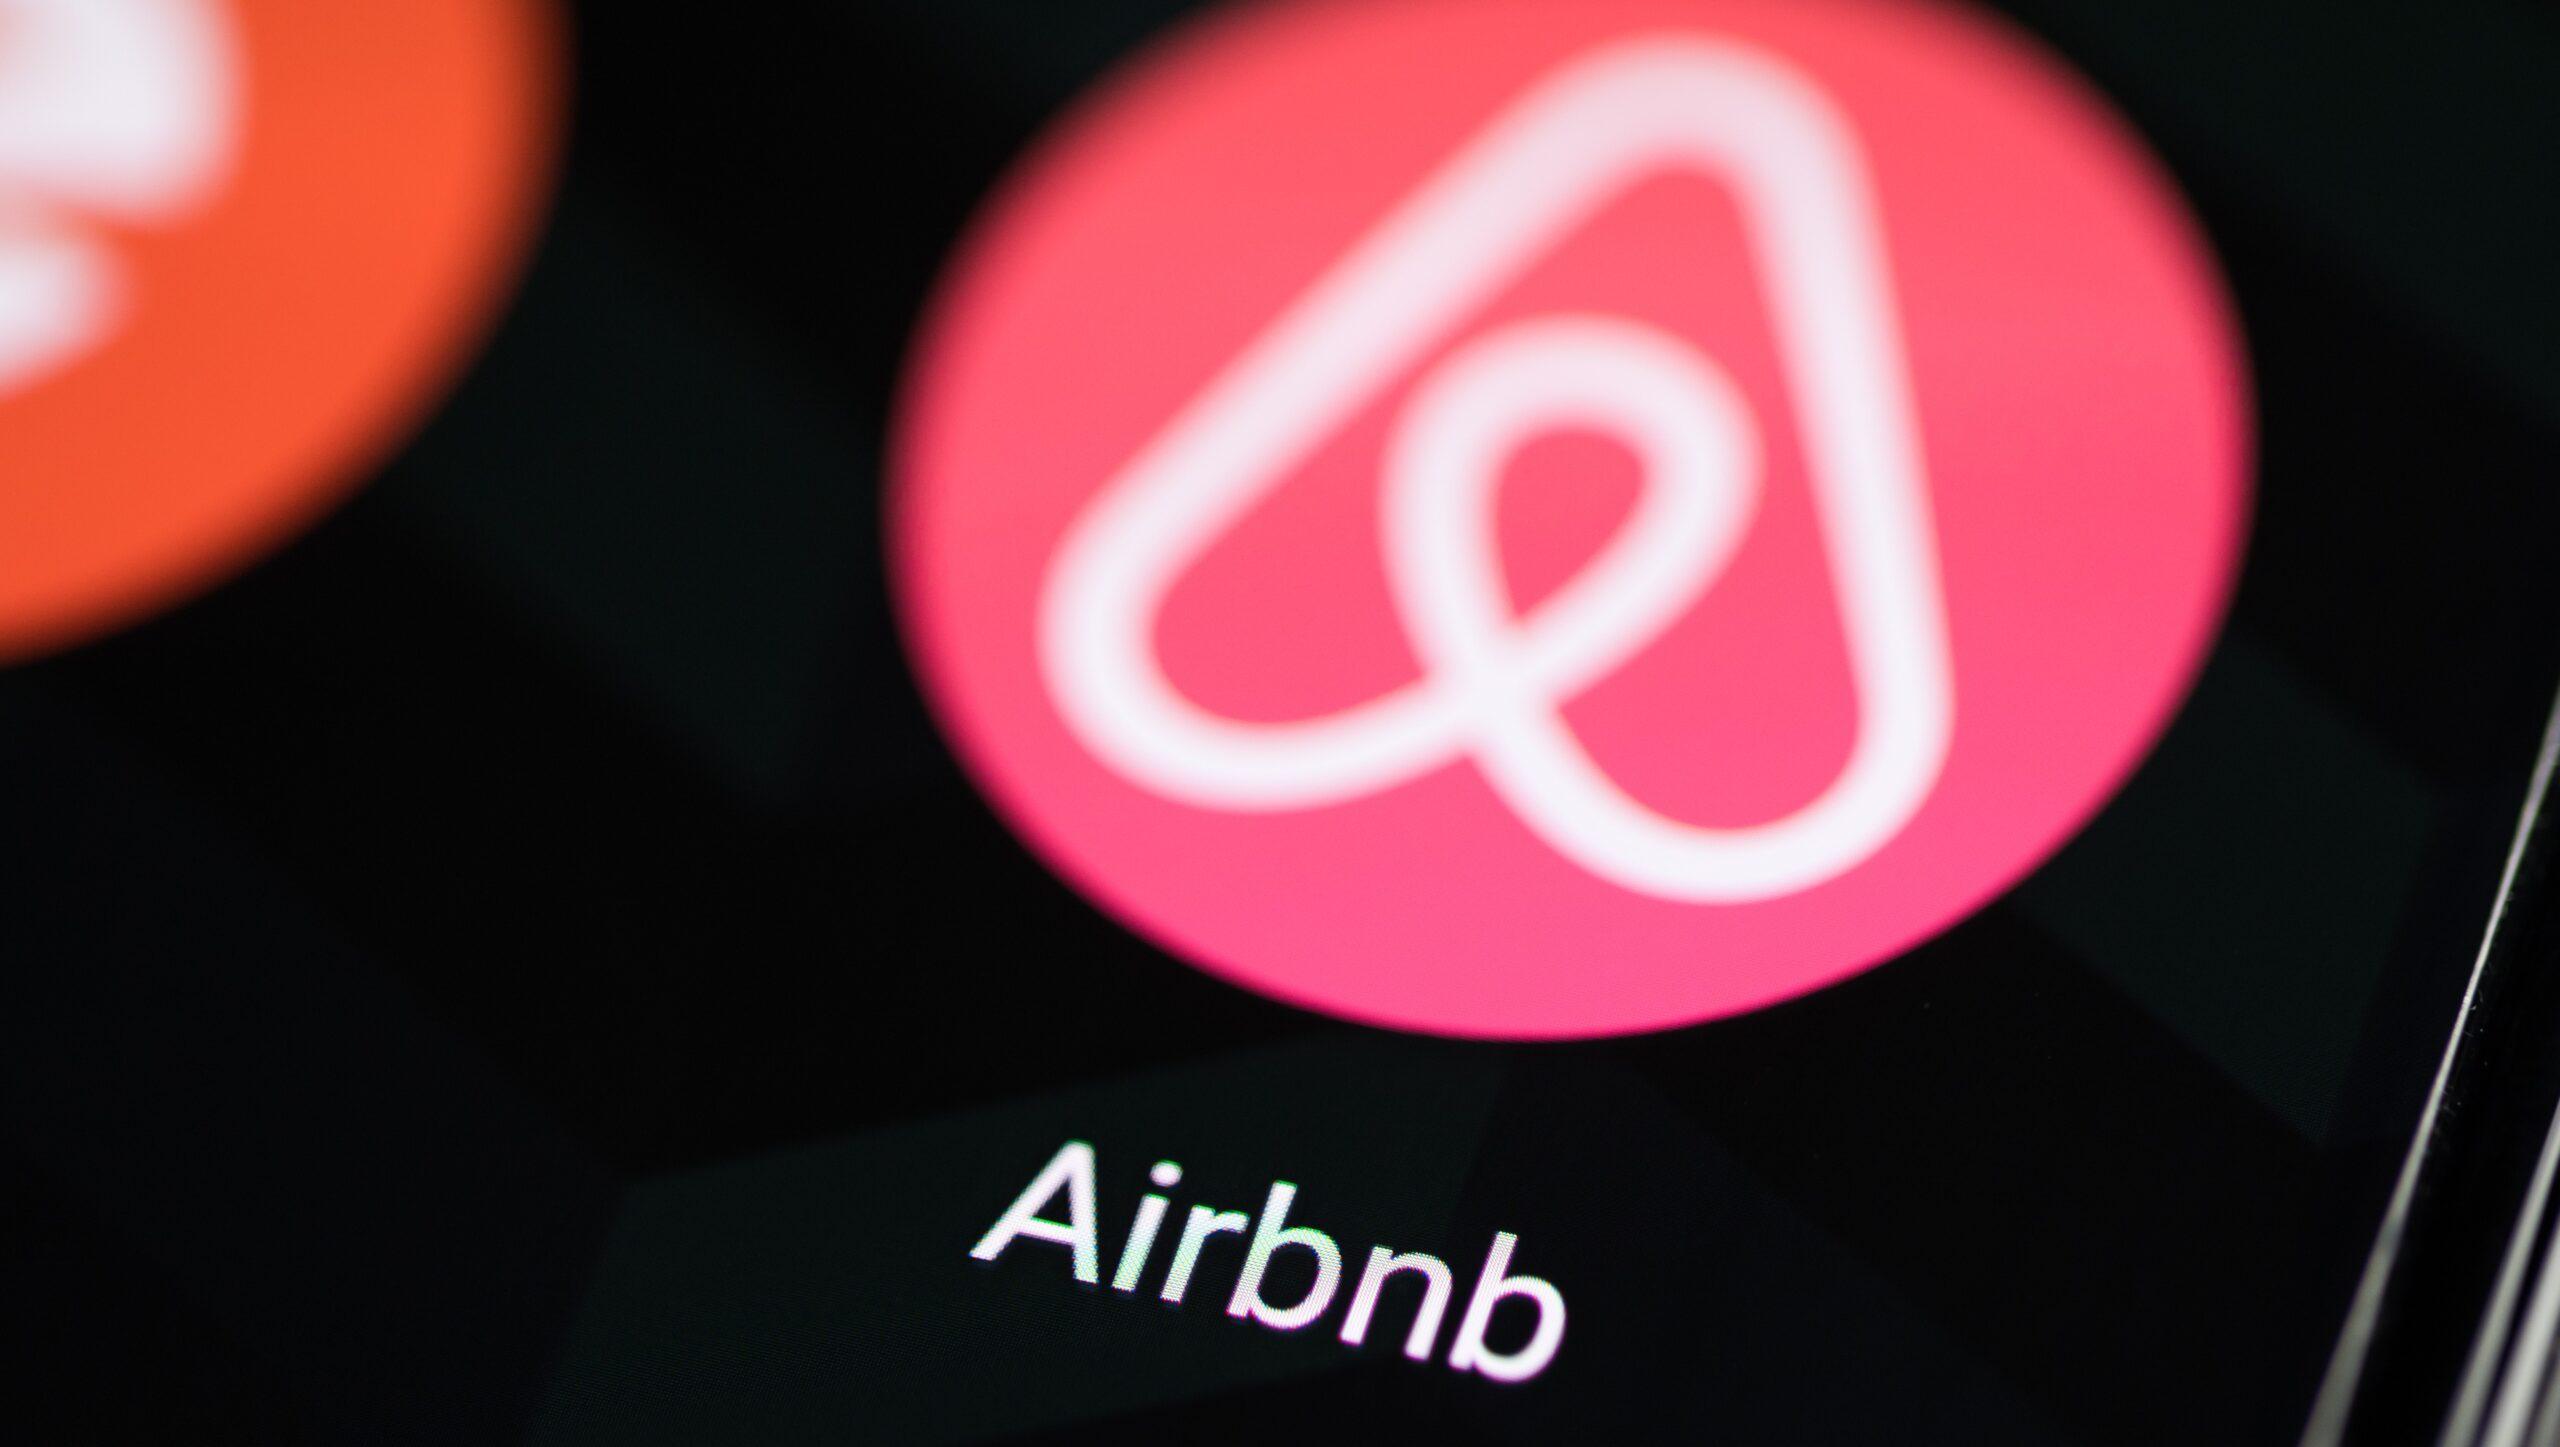 Airbnb logo displayed on a smartphone screen.